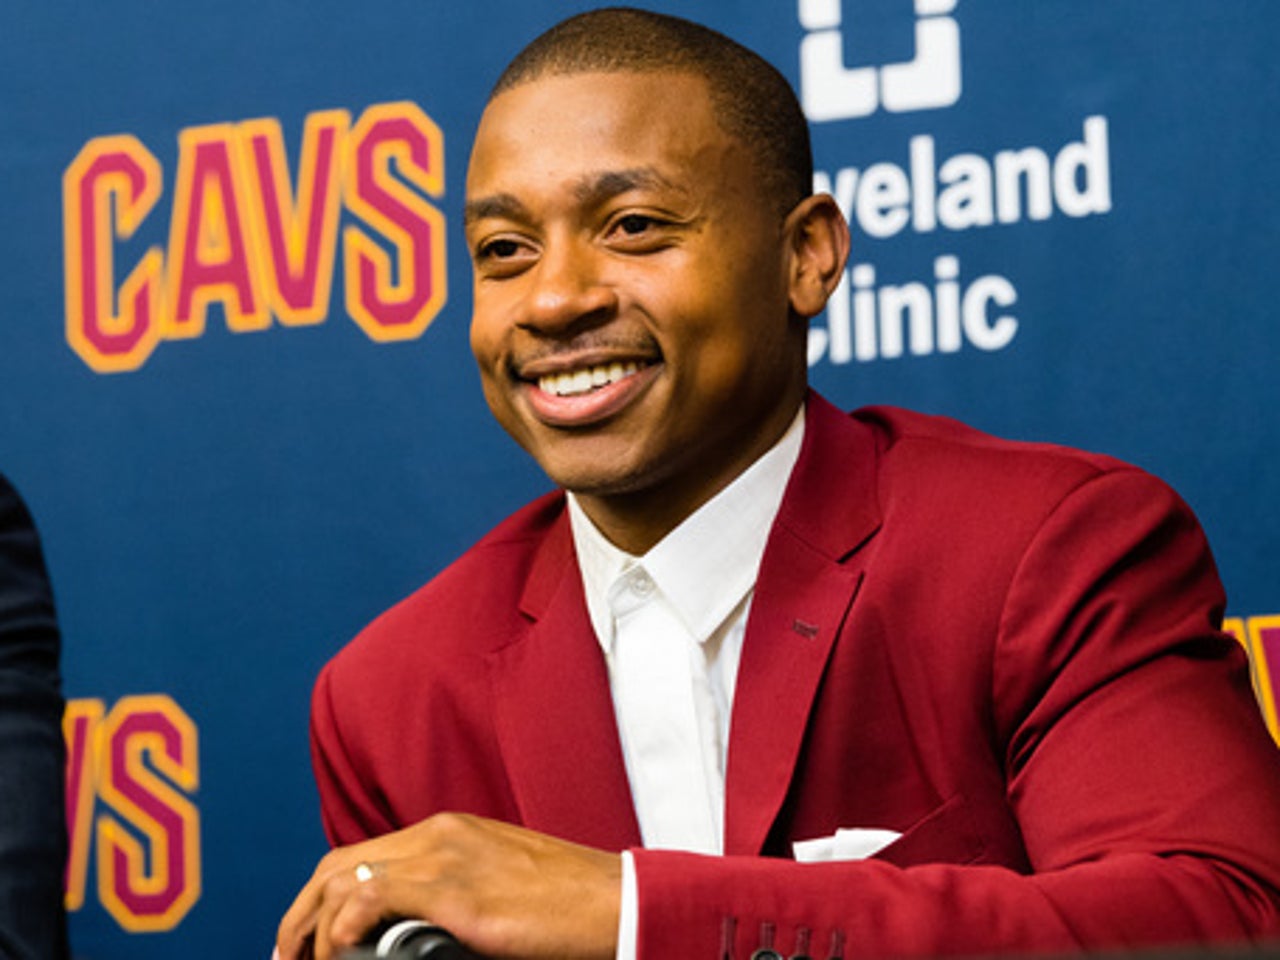 Cavs Announce Isaiah Thomas and Jae Crowder's Jersey Numbers